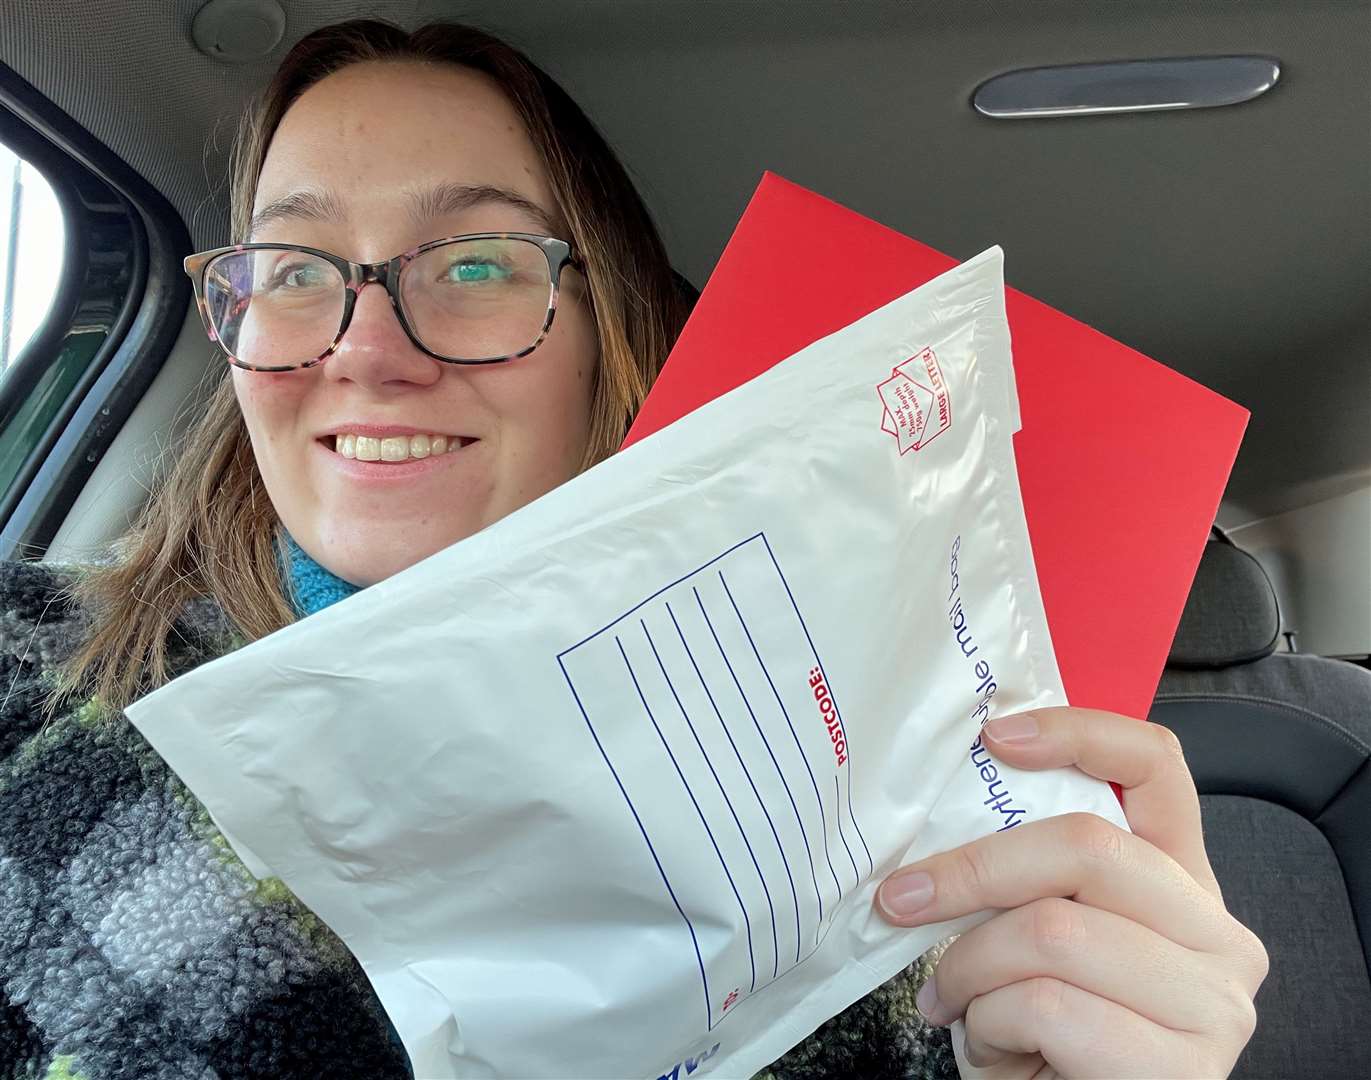 KentOnline reporter Alex Langridge sent a letter and parcel to a friend in West Malling via Royal Mail to see the post issues first-hand